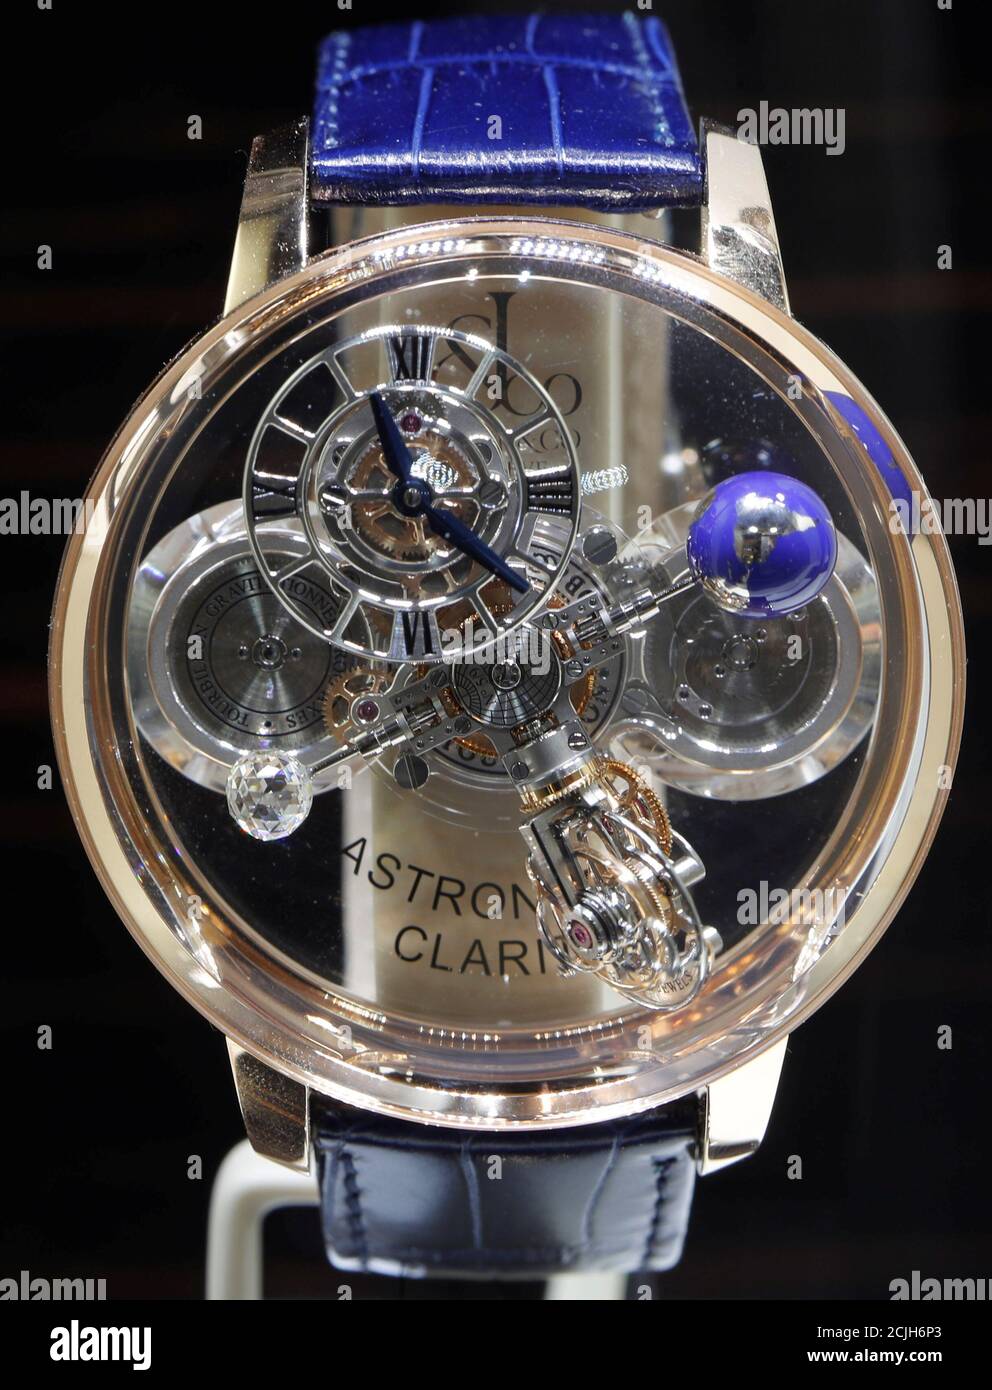 An Astronomia Clarity watch of Swiss manufacturer Jacob & Co. is displayed  at the Baselworld watch and jewellery fair in Basel, Switzerland March 21,  2019. REUTERS/Arnd Wiegmann Stock Photo - Alamy